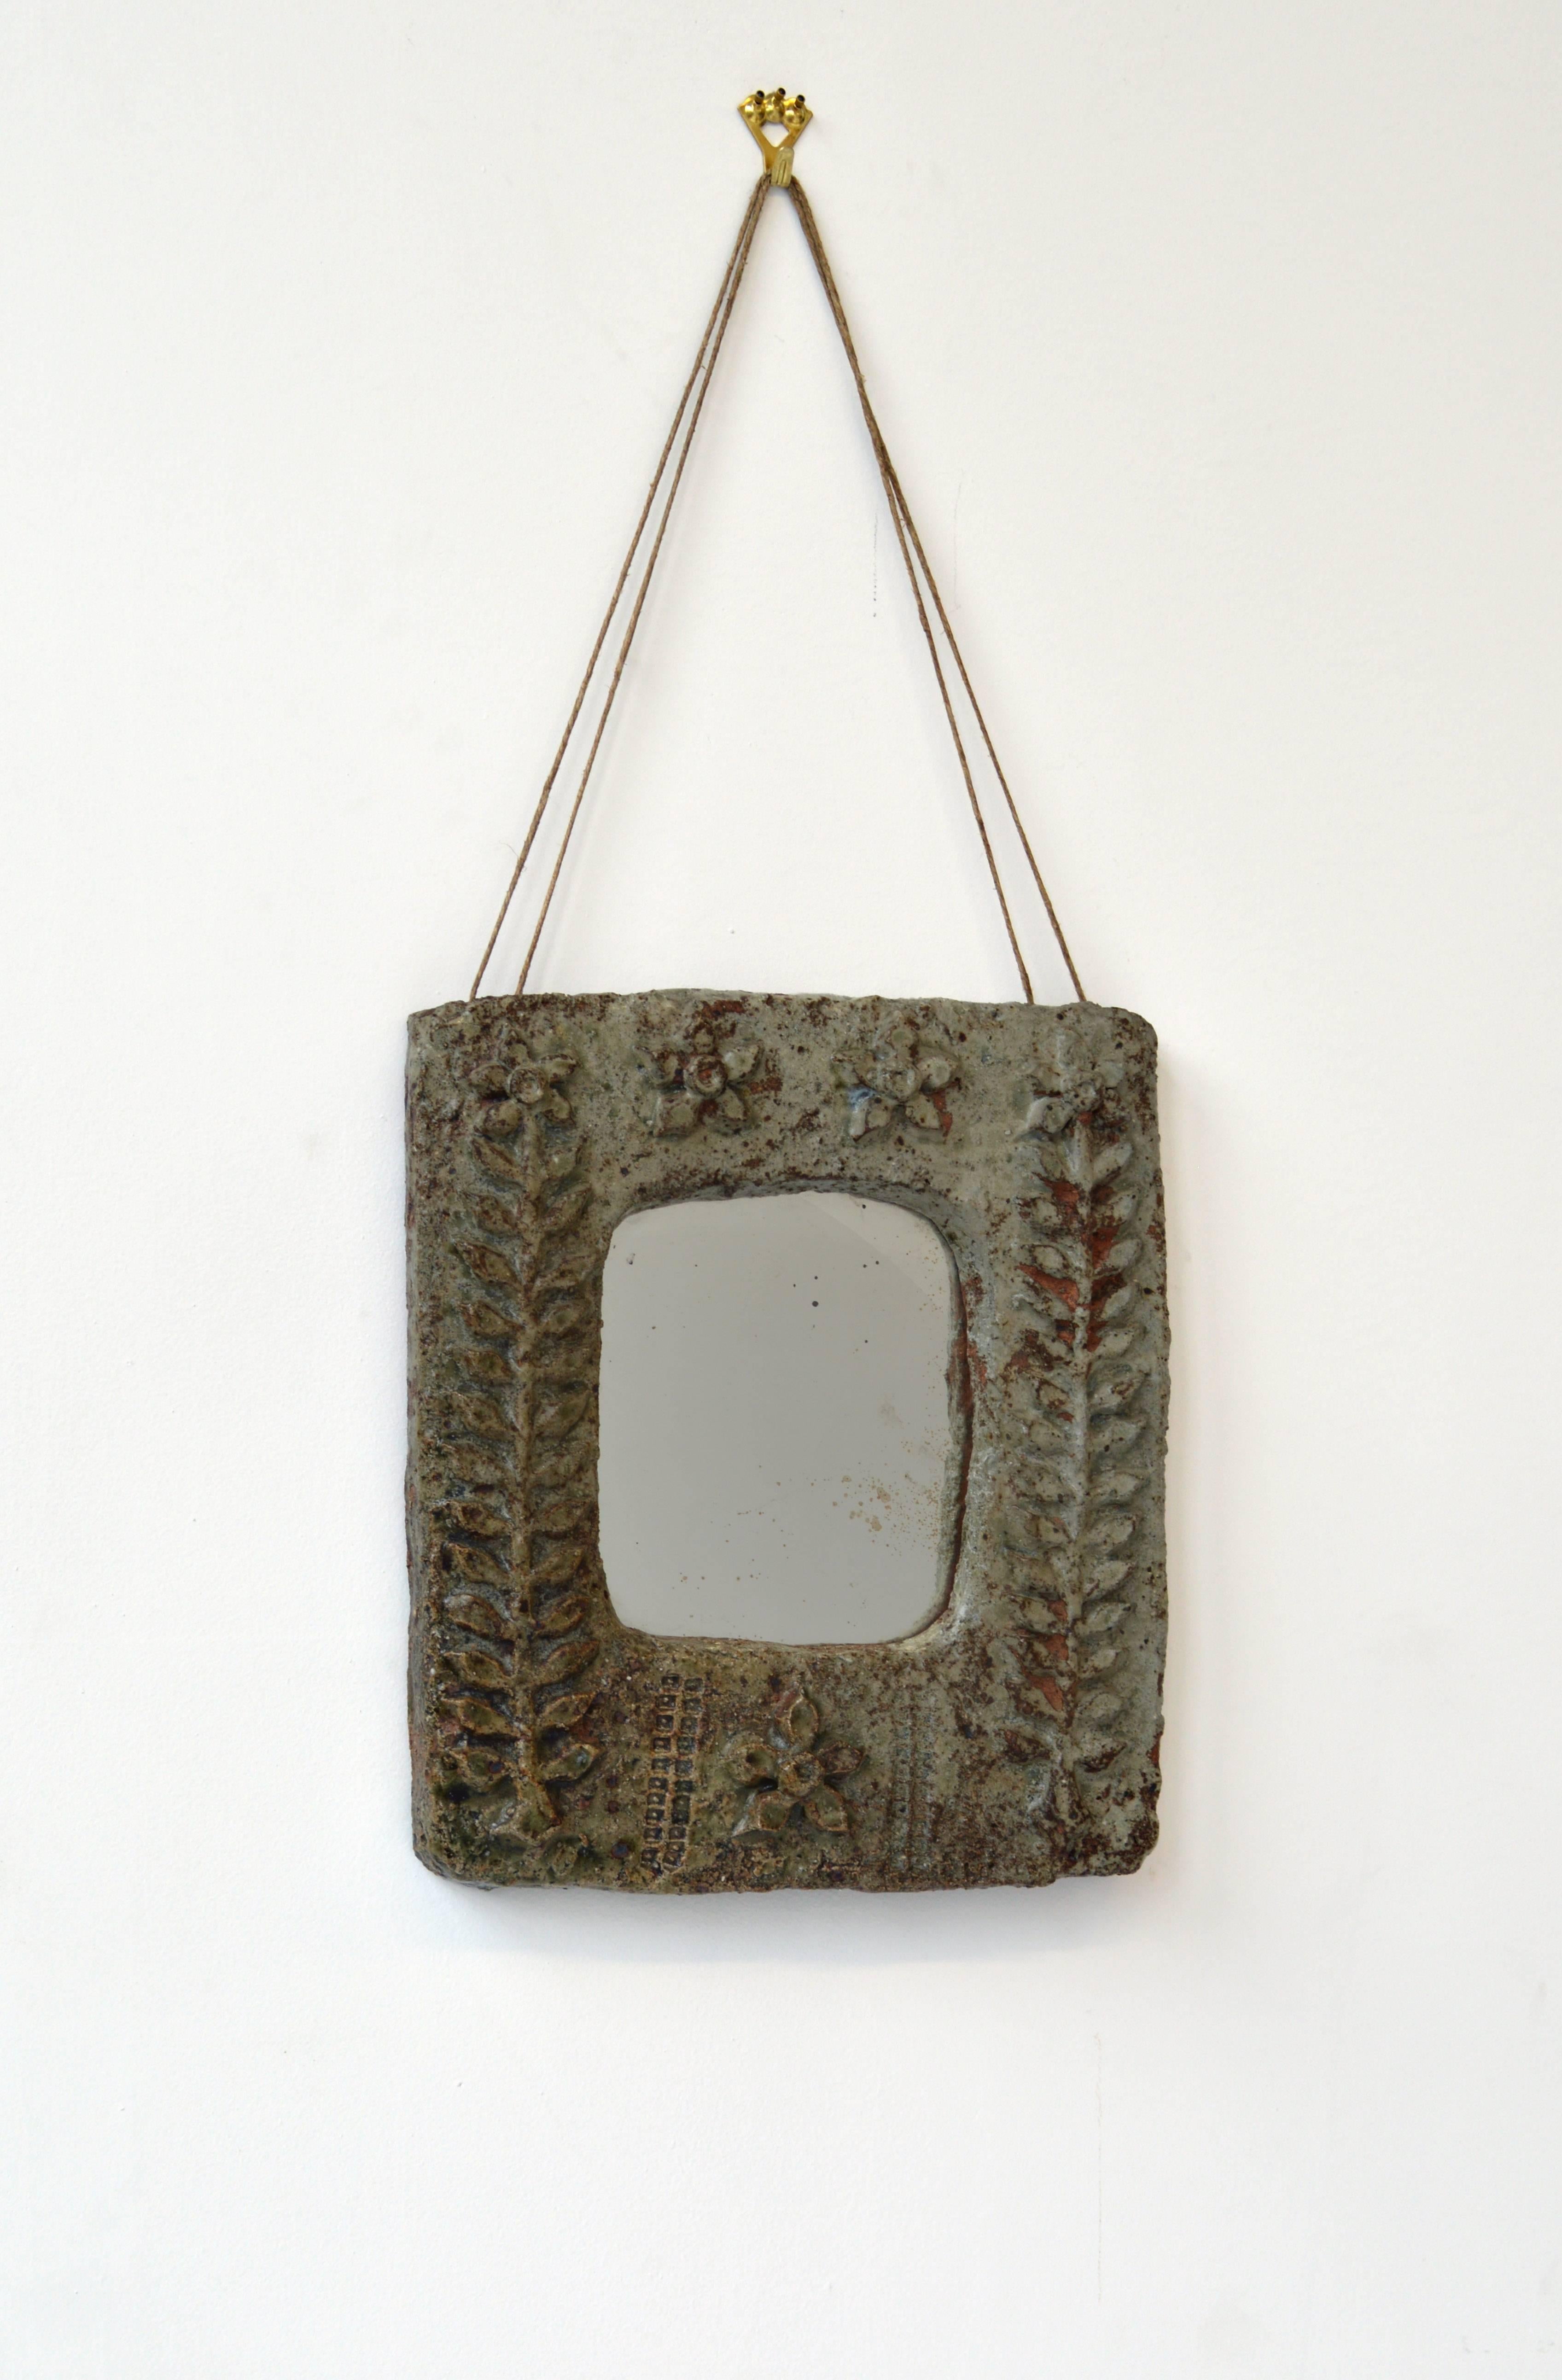 Ceramic wall mirror with relief botanical motif and twine hanging chord. Originally from France, circa 1960. Inset mirror dimensions: 8